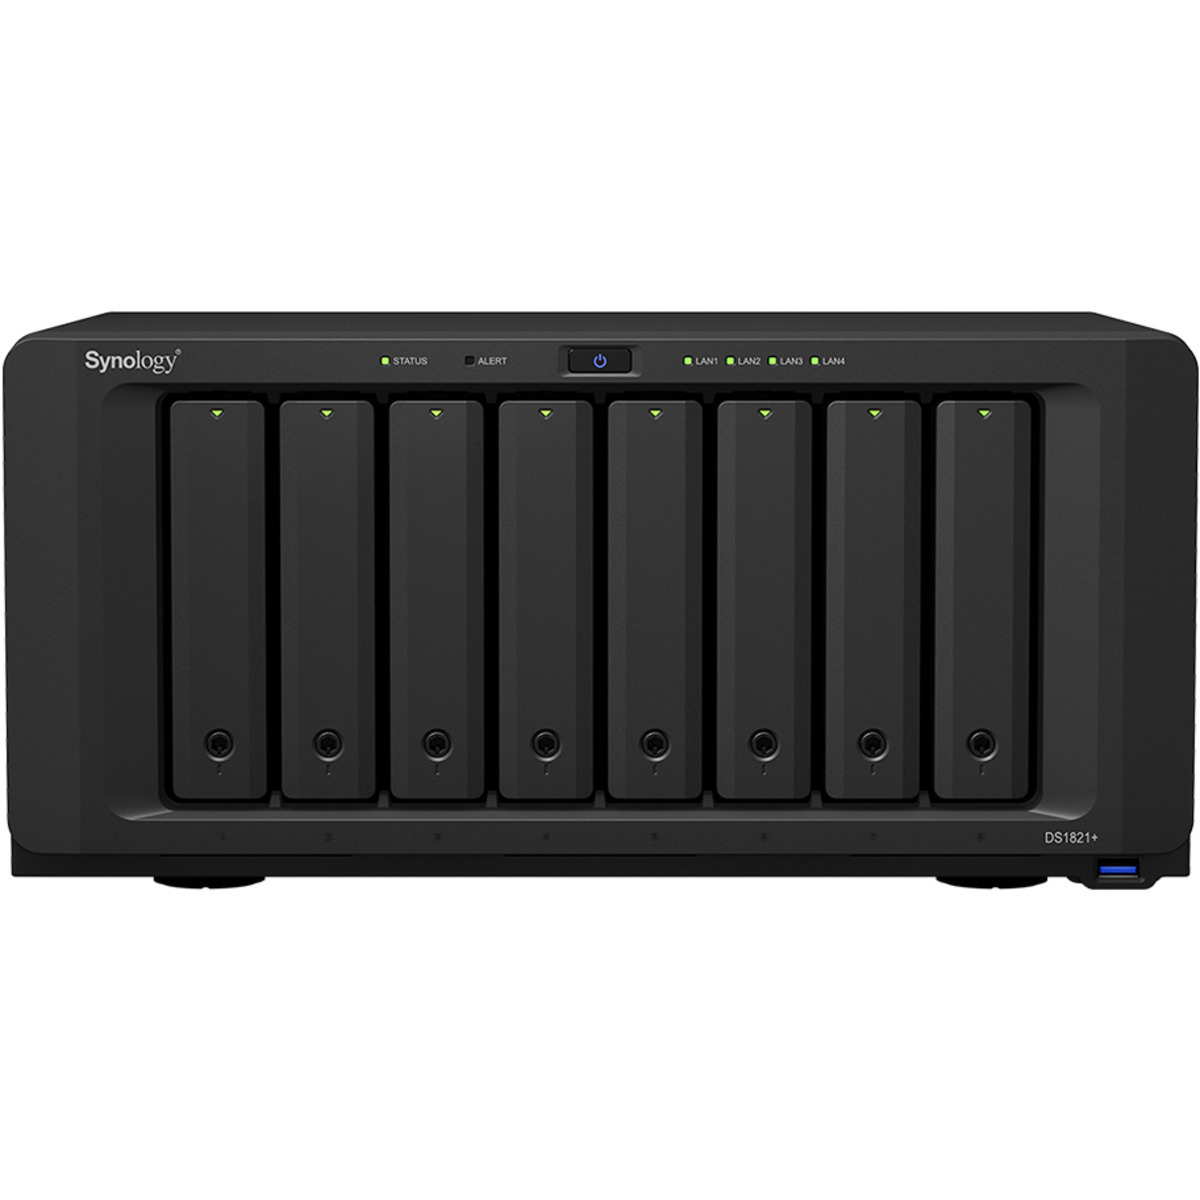 Synology DiskStation DS1821+ 80tb 8-Bay Desktop Multimedia / Power User / Business NAS - Network Attached Storage Device 8x10tb Seagate EXOS X18 ST10000NM018G 3.5 7200rpm SATA 6Gb/s HDD ENTERPRISE Class Drives Installed - Burn-In Tested - FREE RAM UPGRADE DiskStation DS1821+